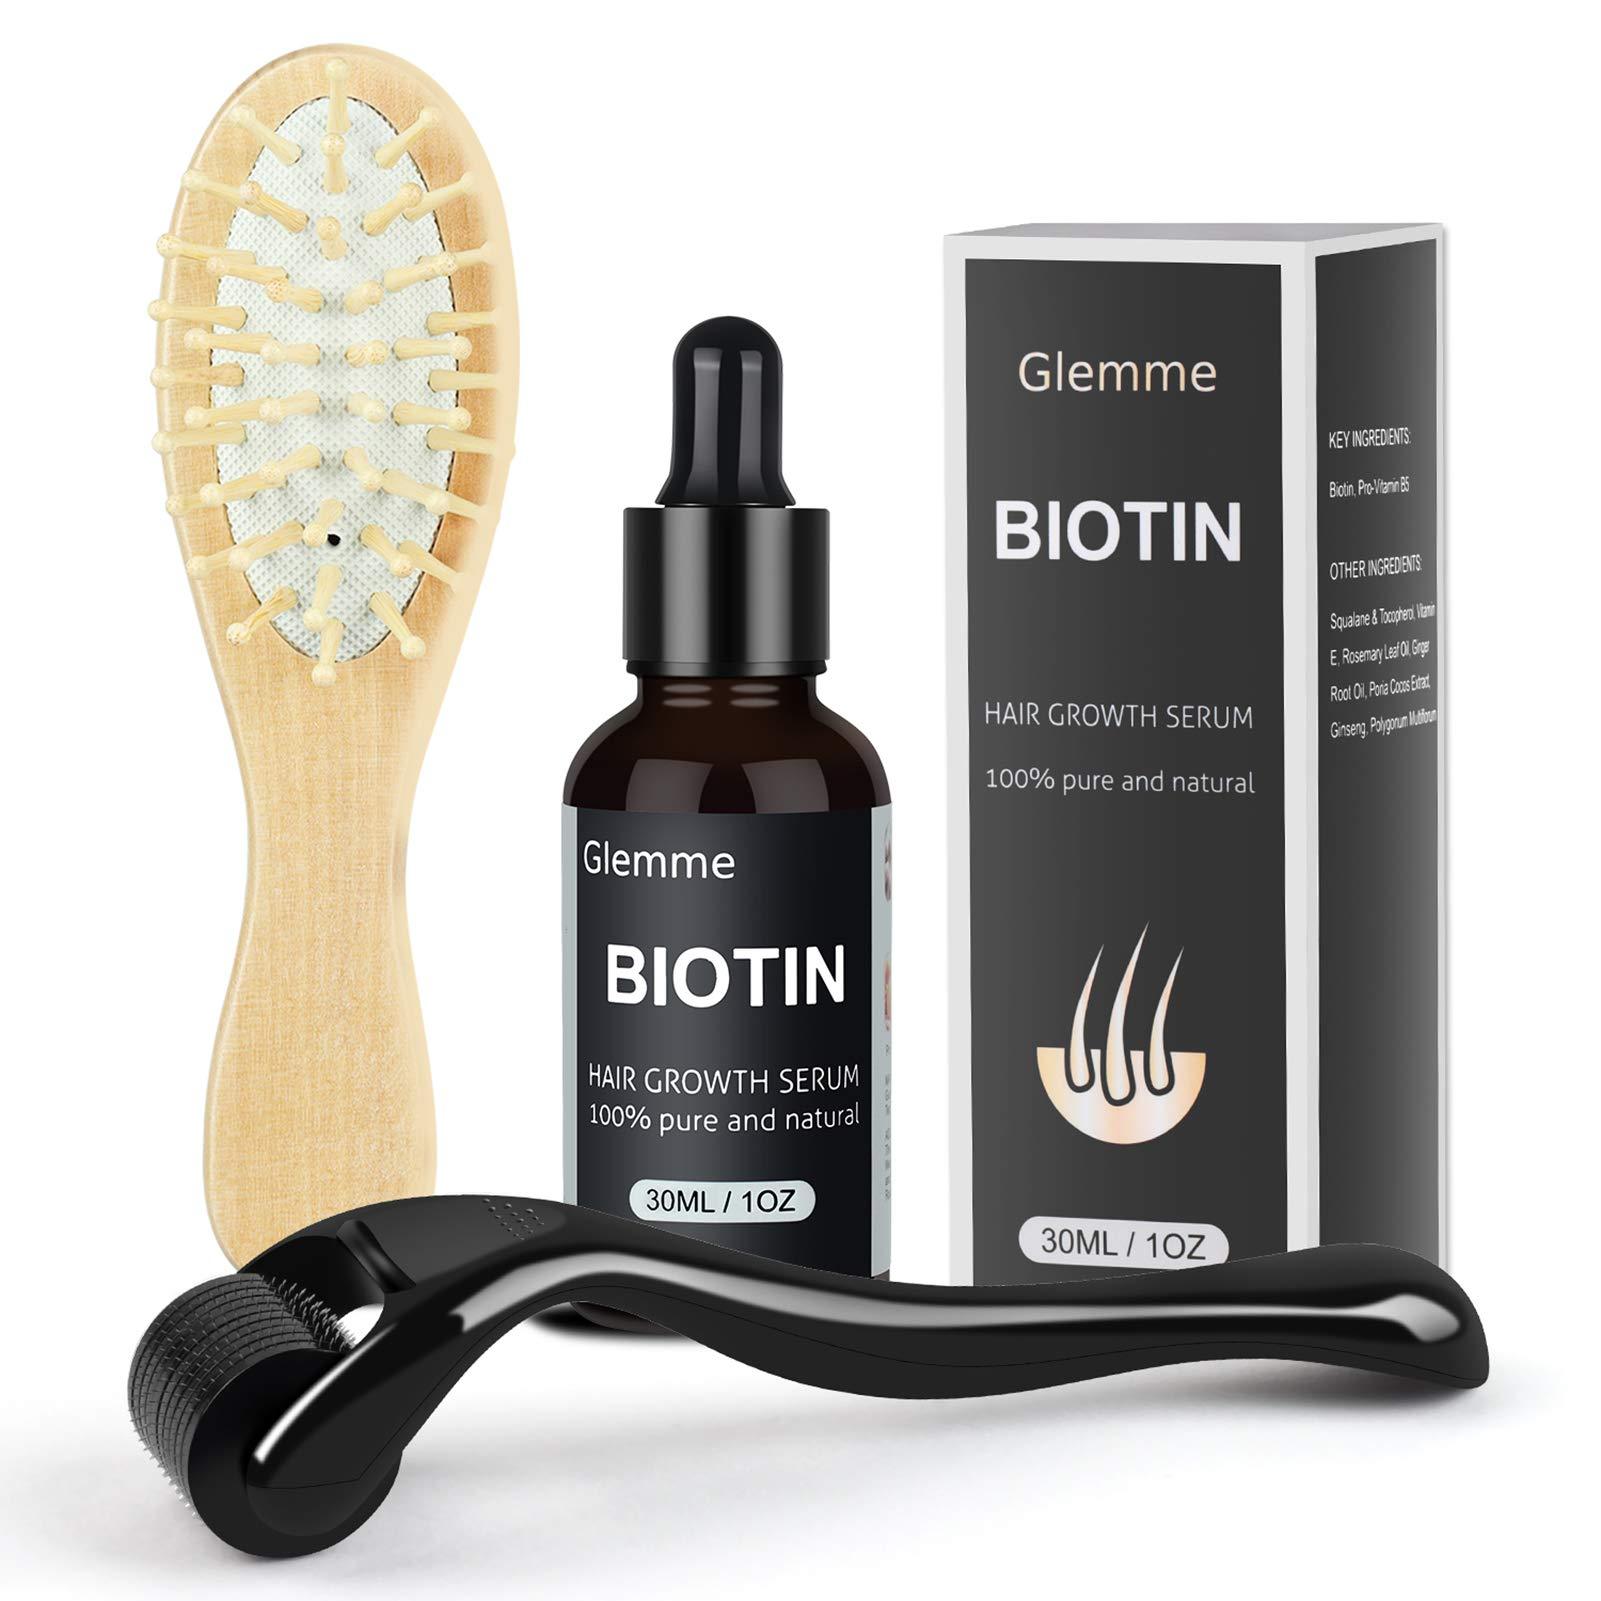 Buy Glemme Biotin Hair Growth Products Kit, Microneedle Derma Roller for  Scalp Hair Regrowth Men and Women, Best Hair Loss Treatment Online at  Lowest Price in Ubuy Nigeria. 644487455